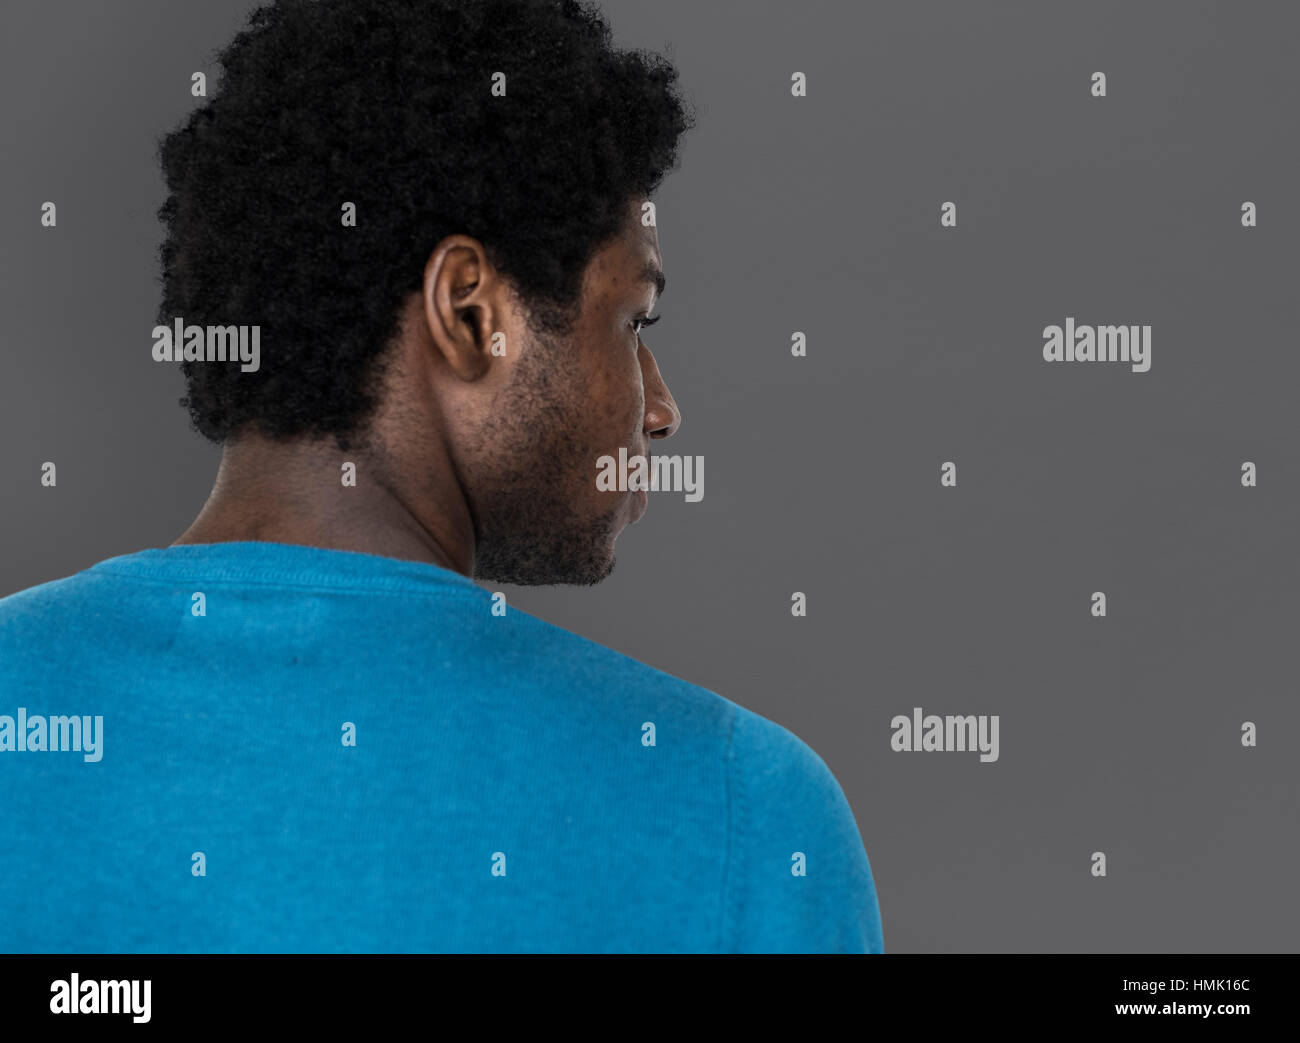 African Descent Serious Looking Back Concept Stock Photo - Alamy